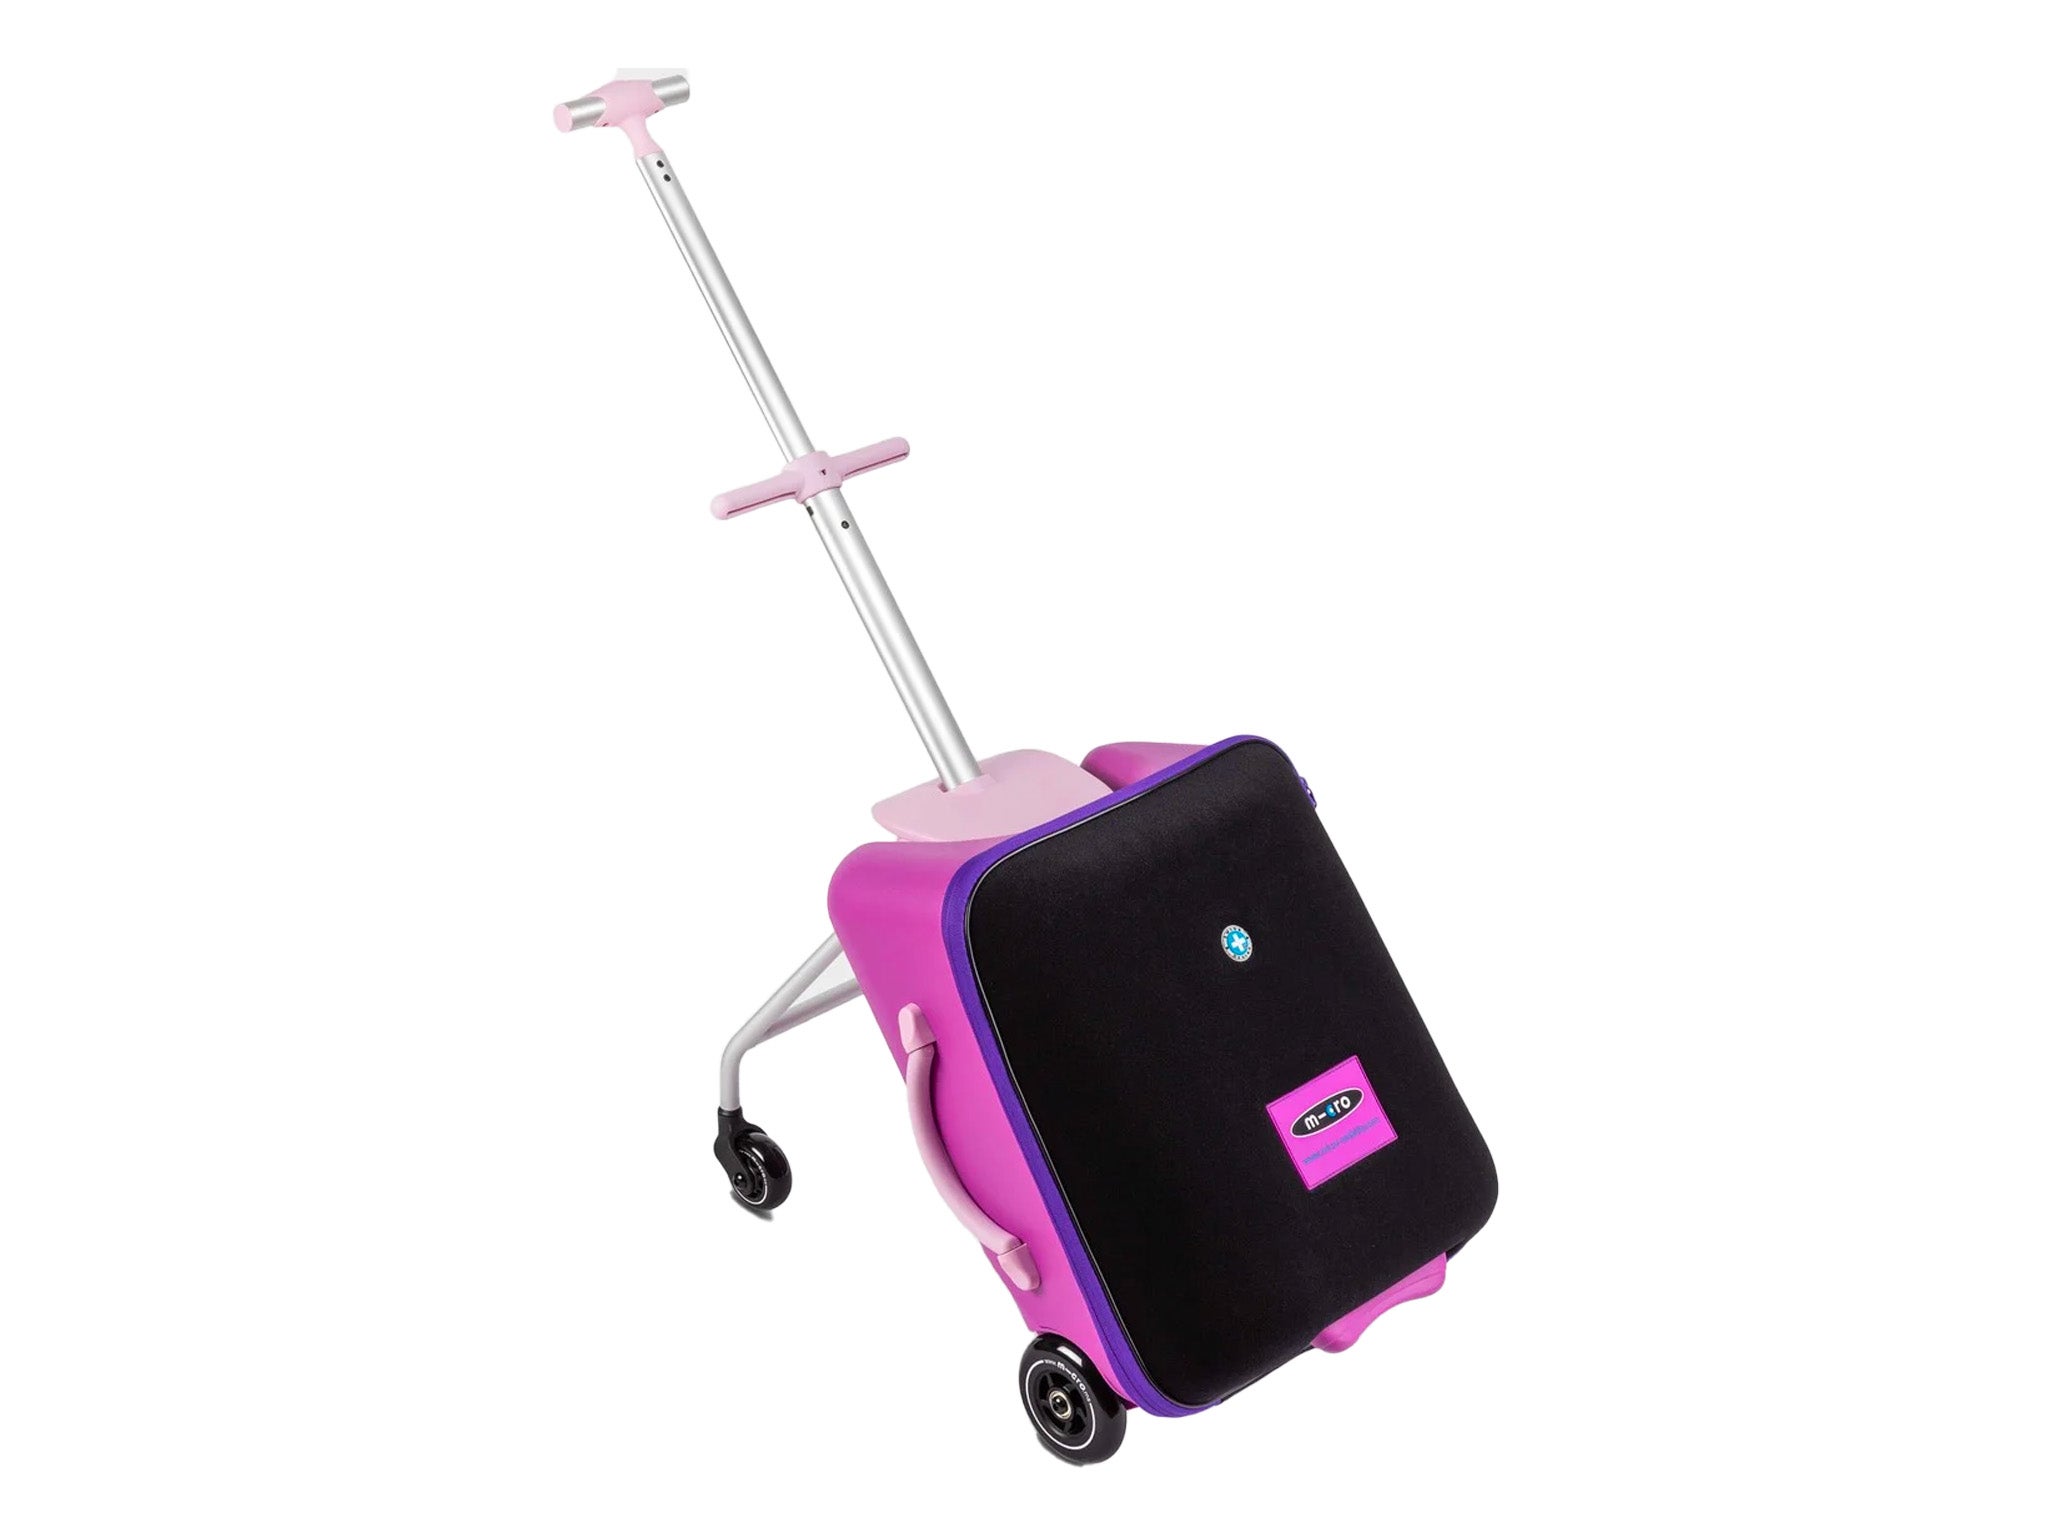 Micro Scooter easy ride-on suitcase.jpg